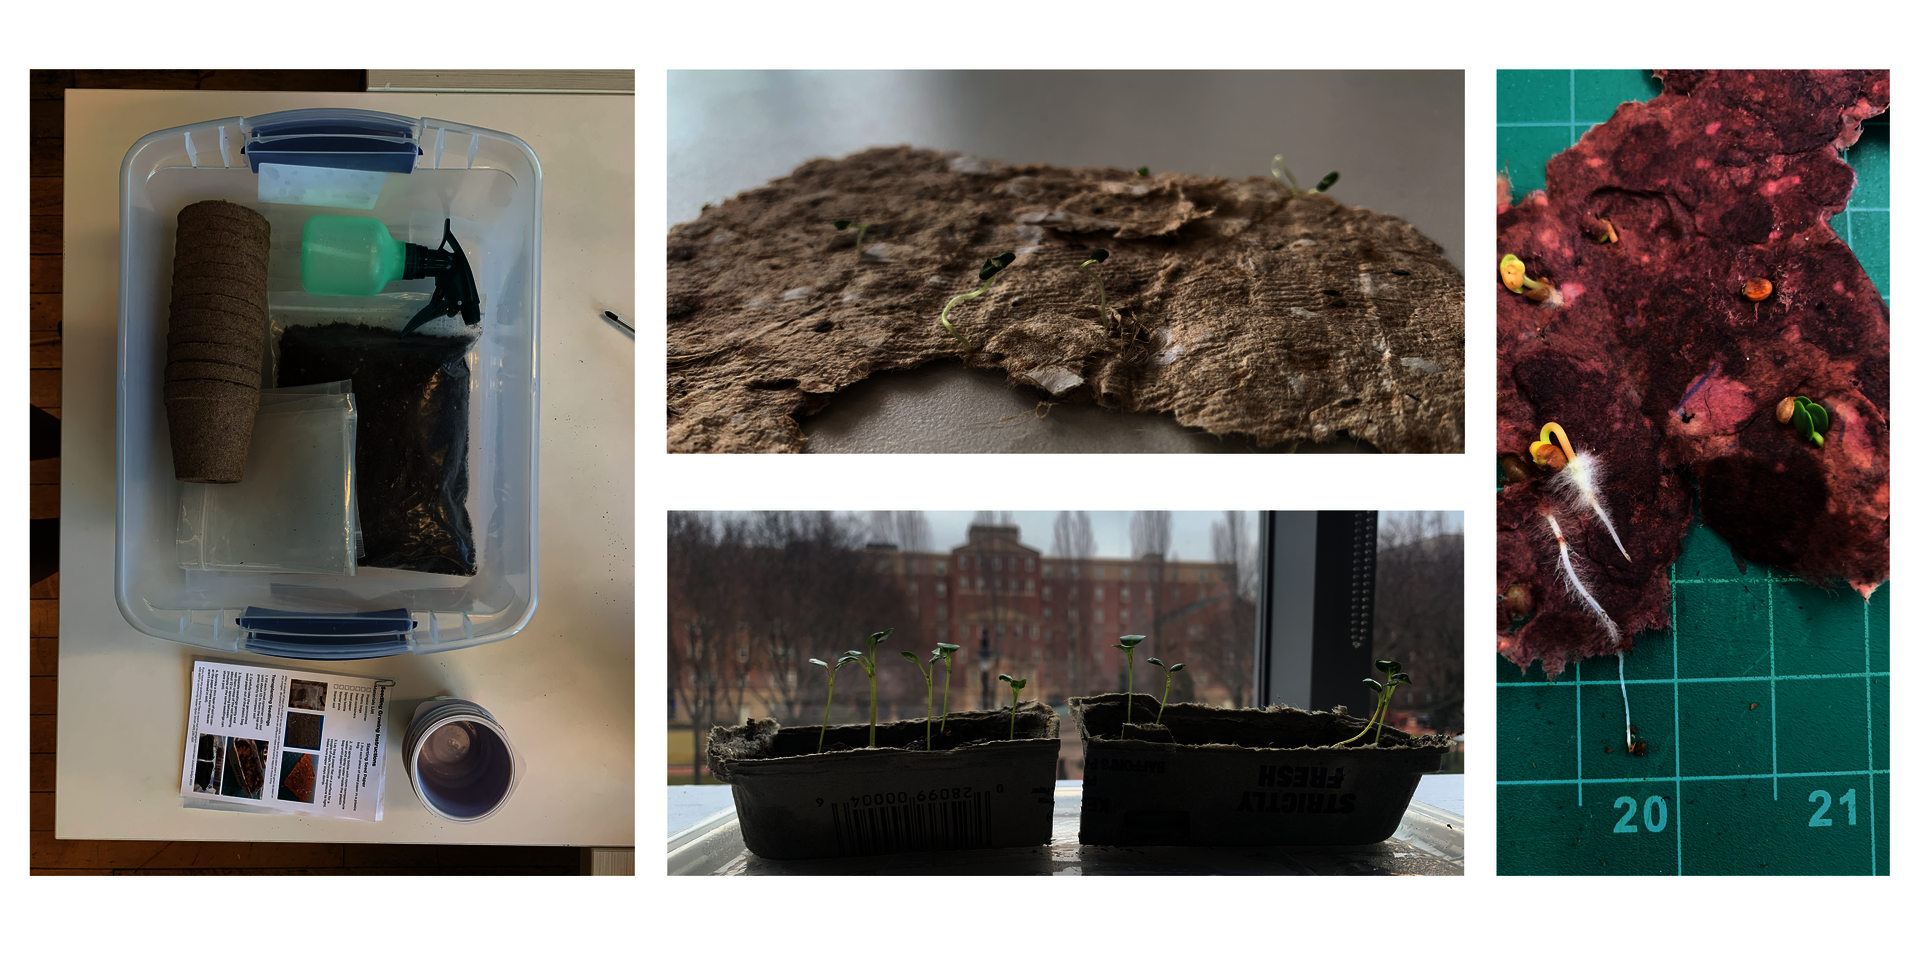 The growing kit in use at different stages from germination of seed paper to transplanting.